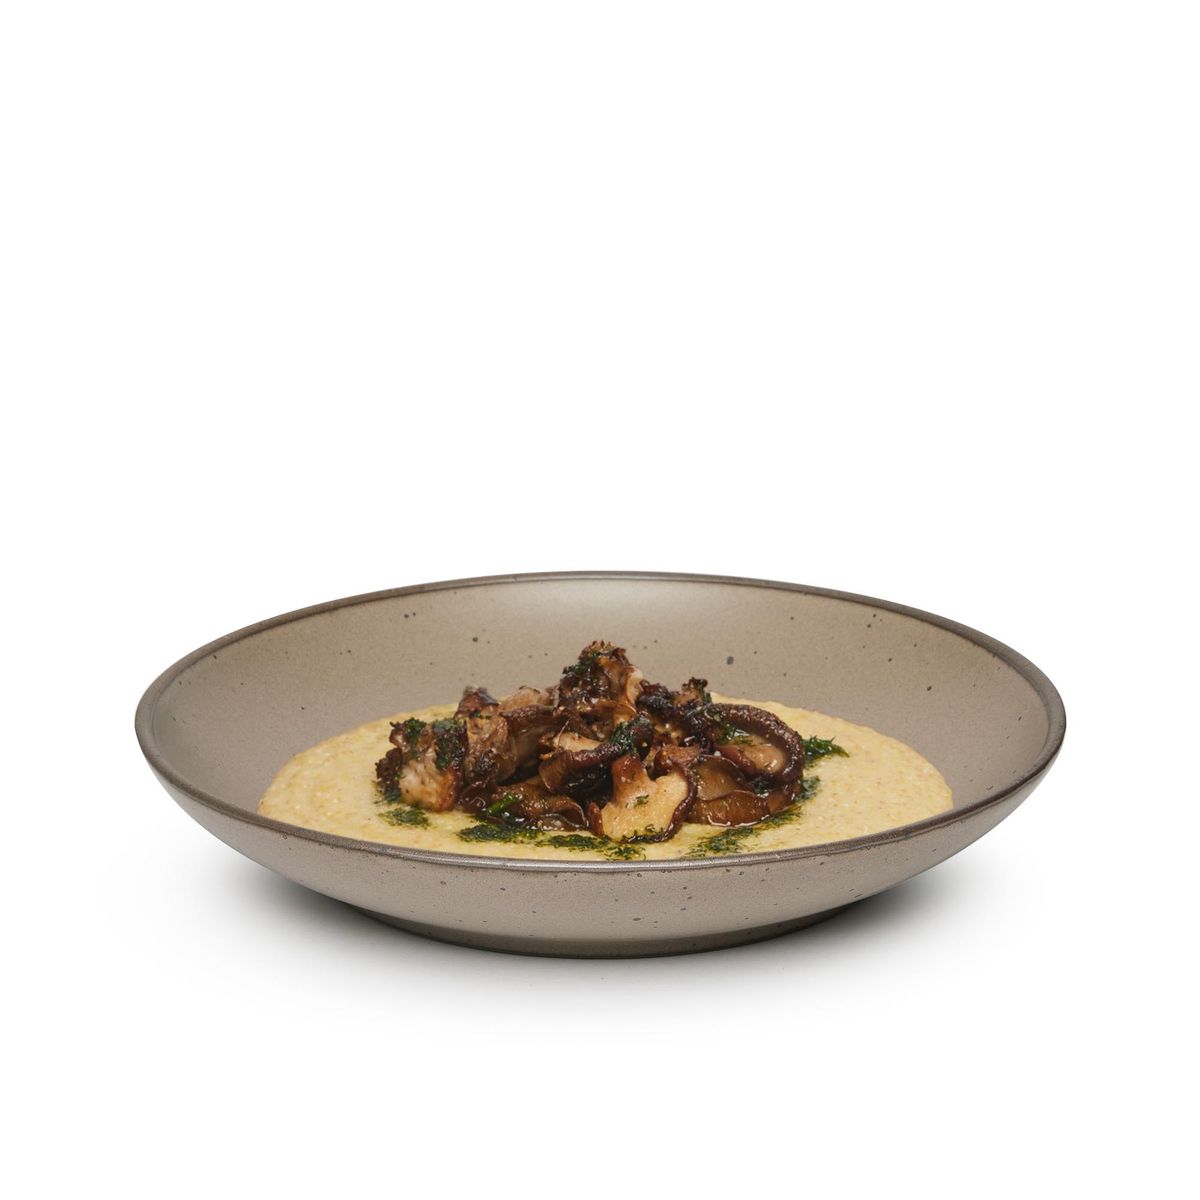 A large ceramic plate with a curved bowl edge in a warm pale brown color featuring iron speckles and an unglazed rim, filled with food